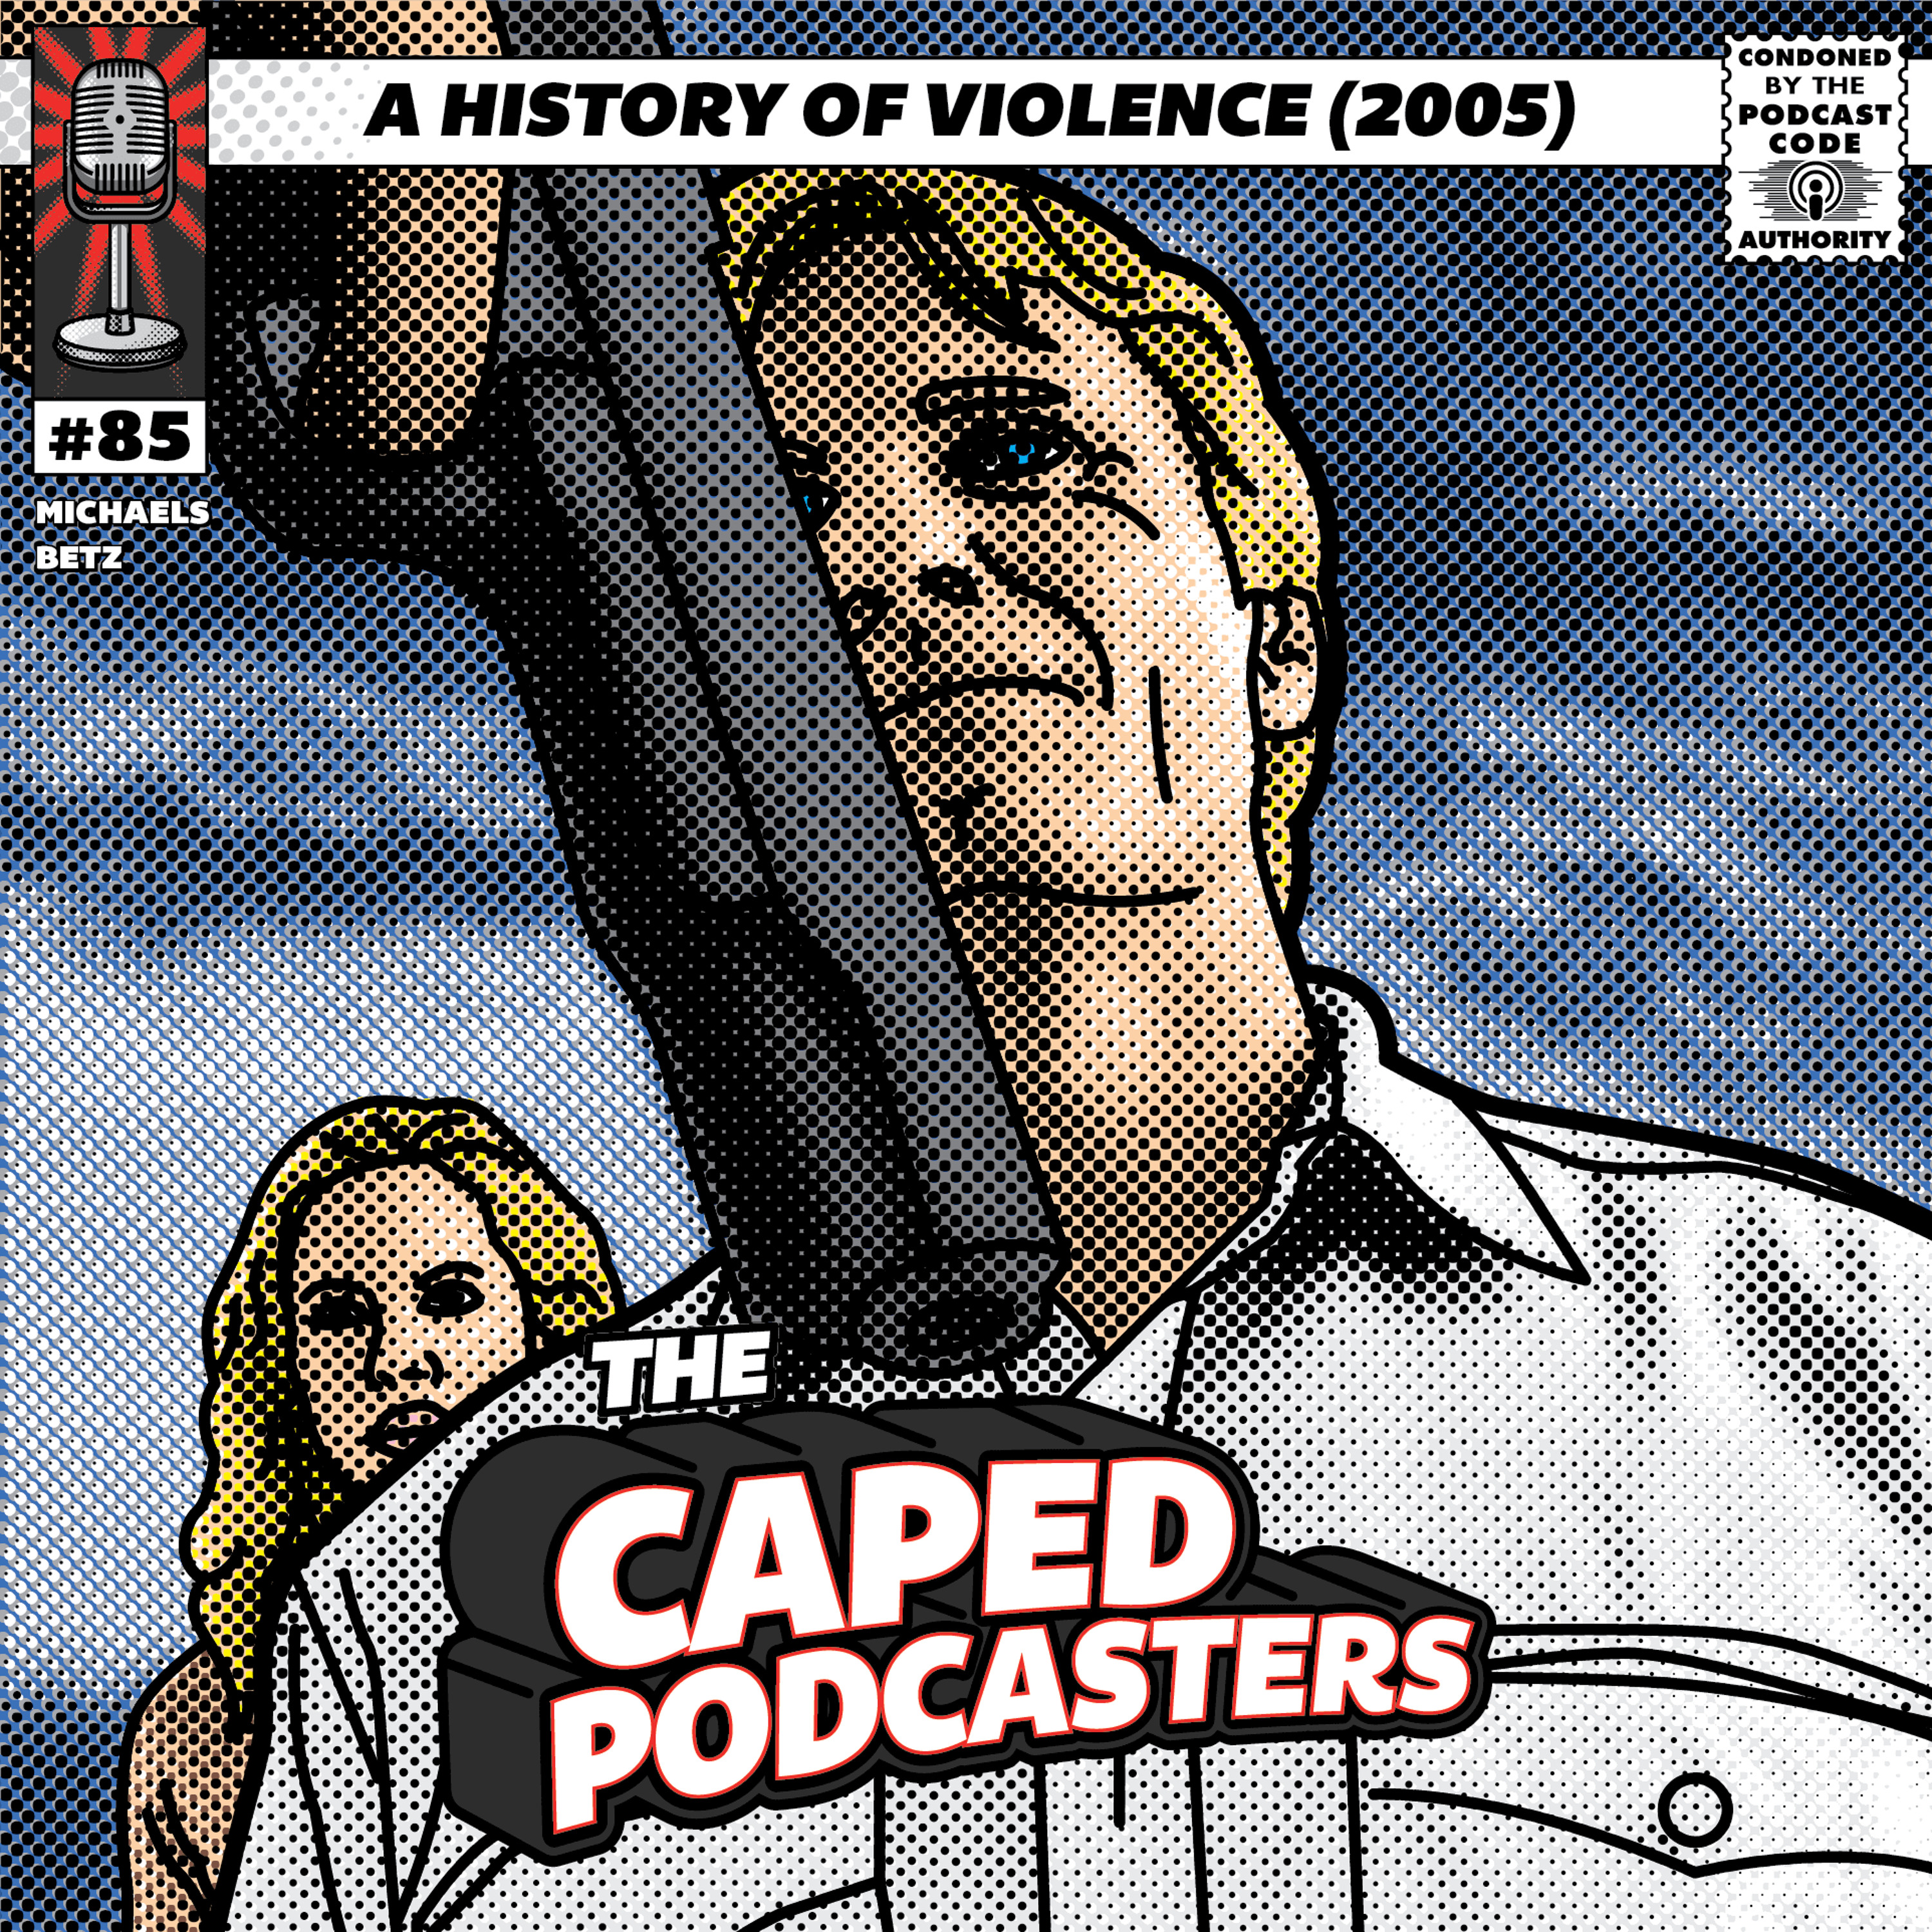 Caped Podcasters #85 - A History of Violence (2005)